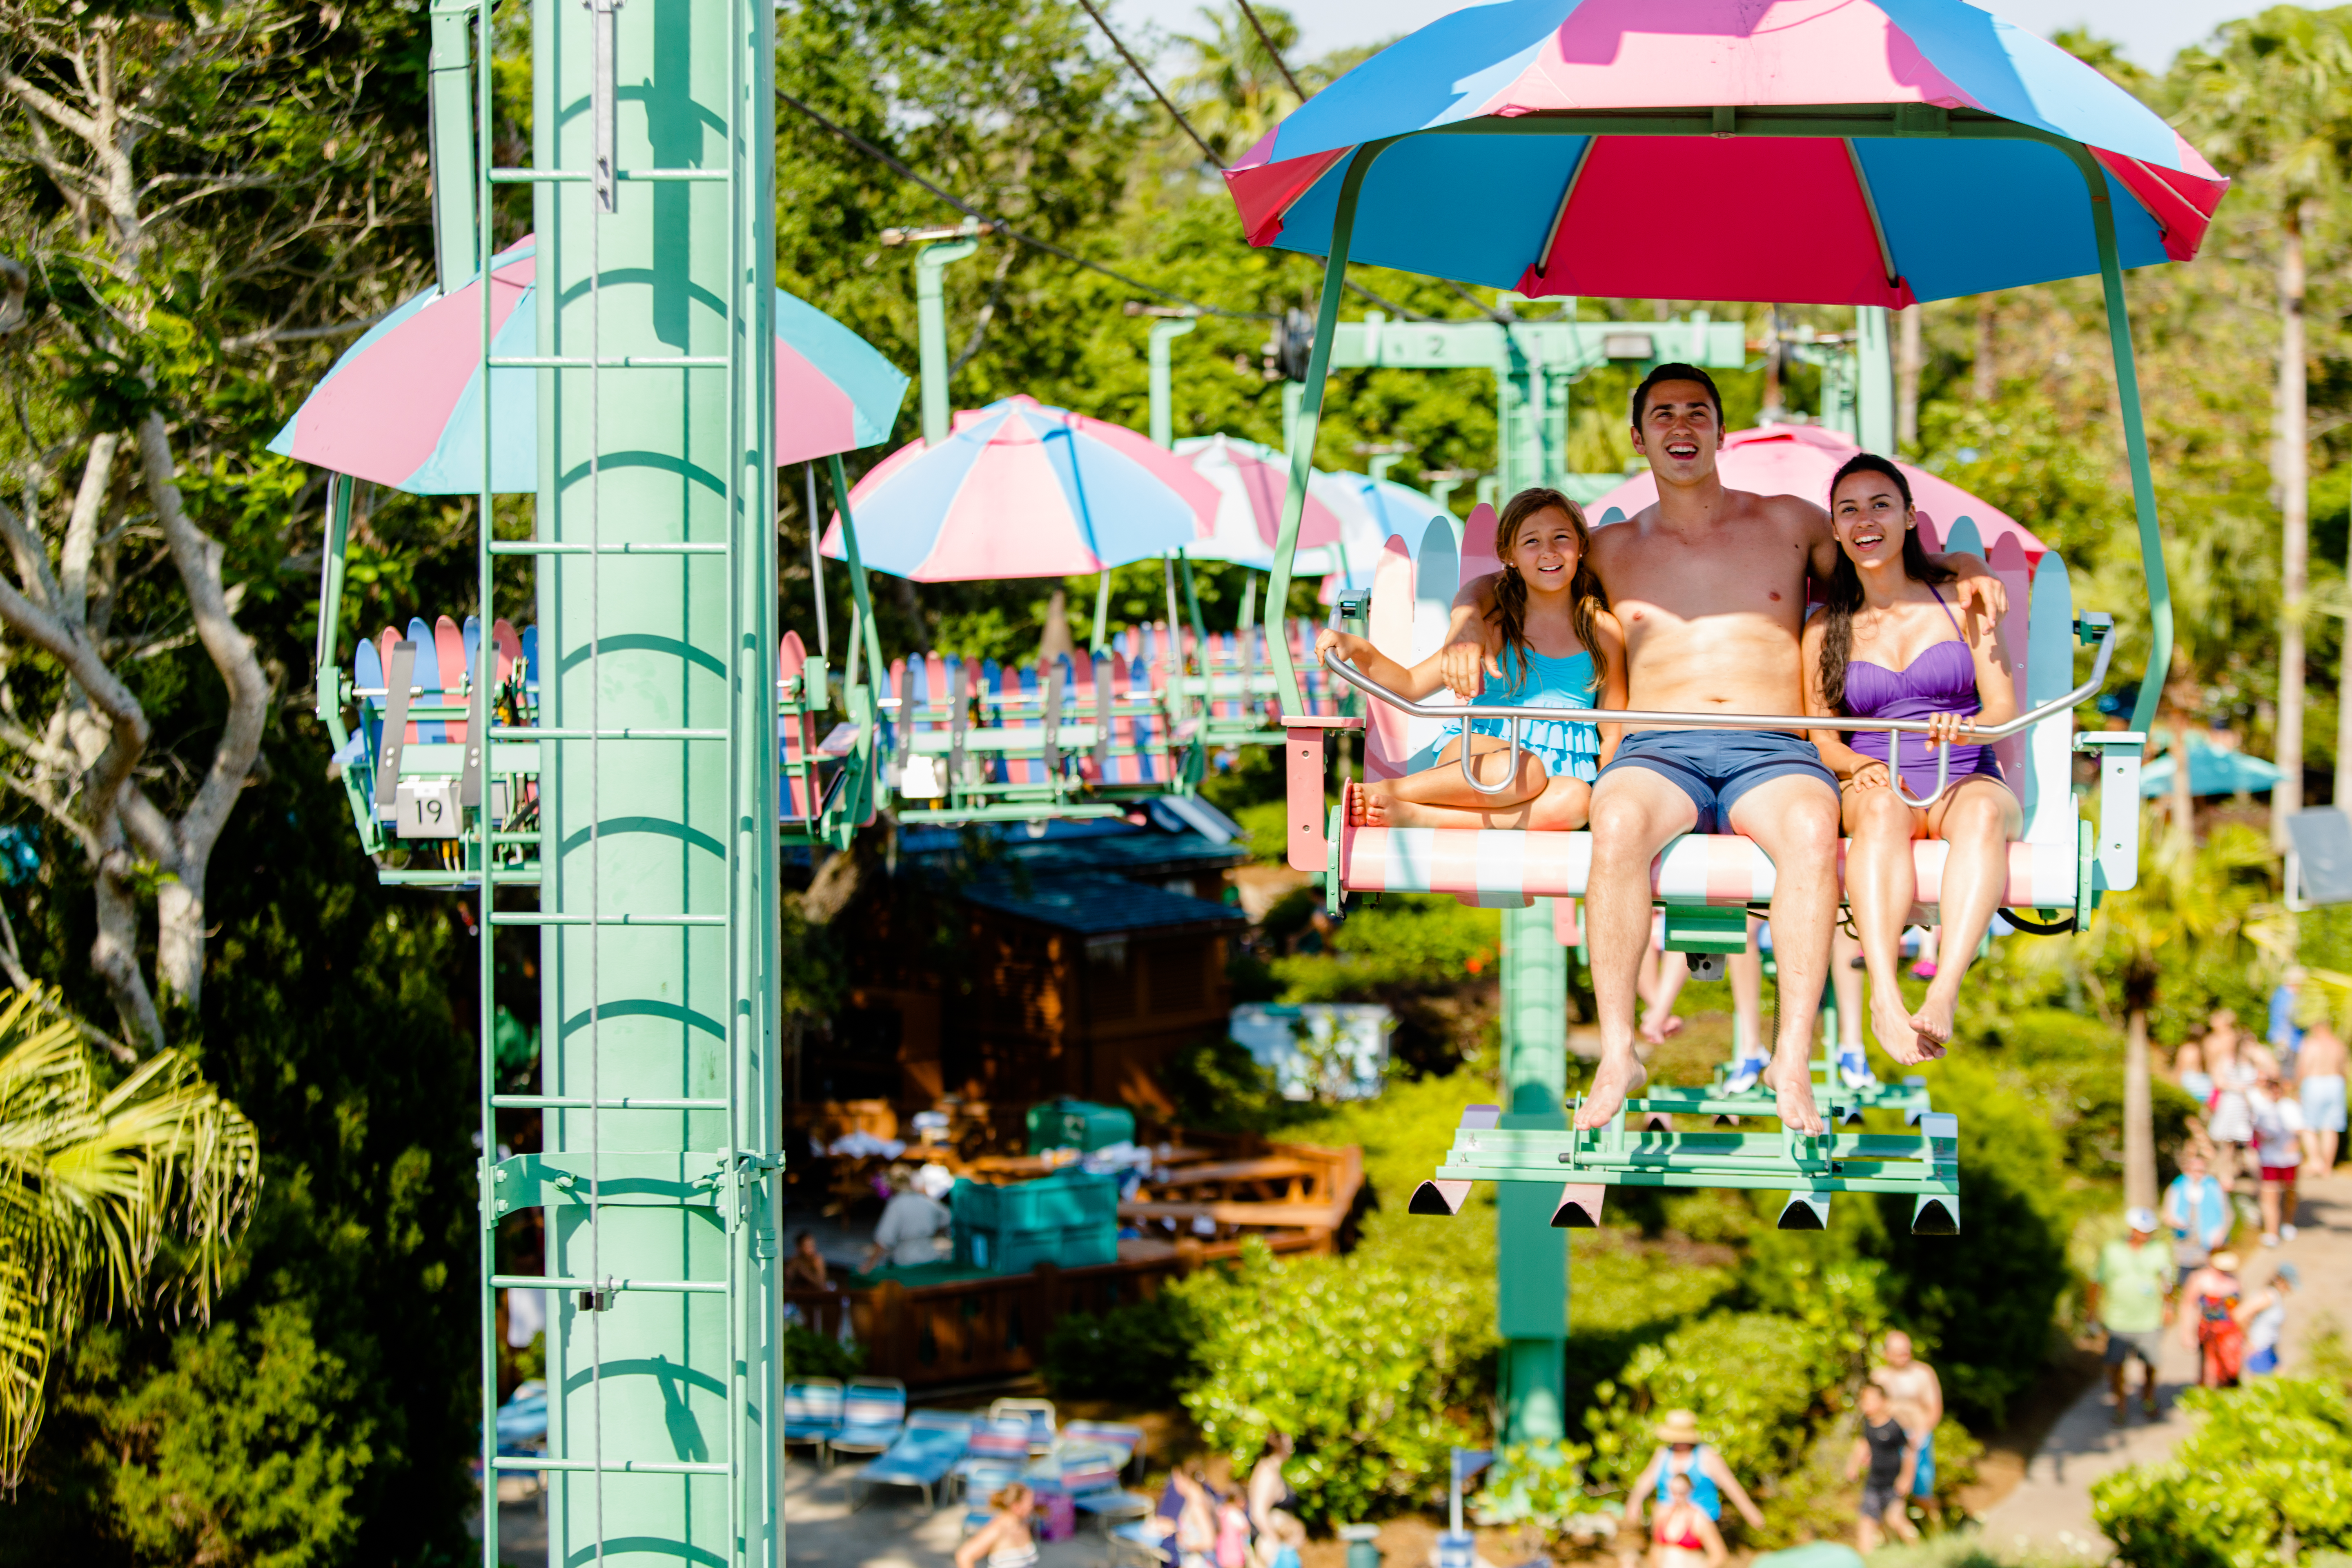 A guy, a little girl and an adult woman ride on a ski lift at Disney's Blizzard Beach during the daytime.